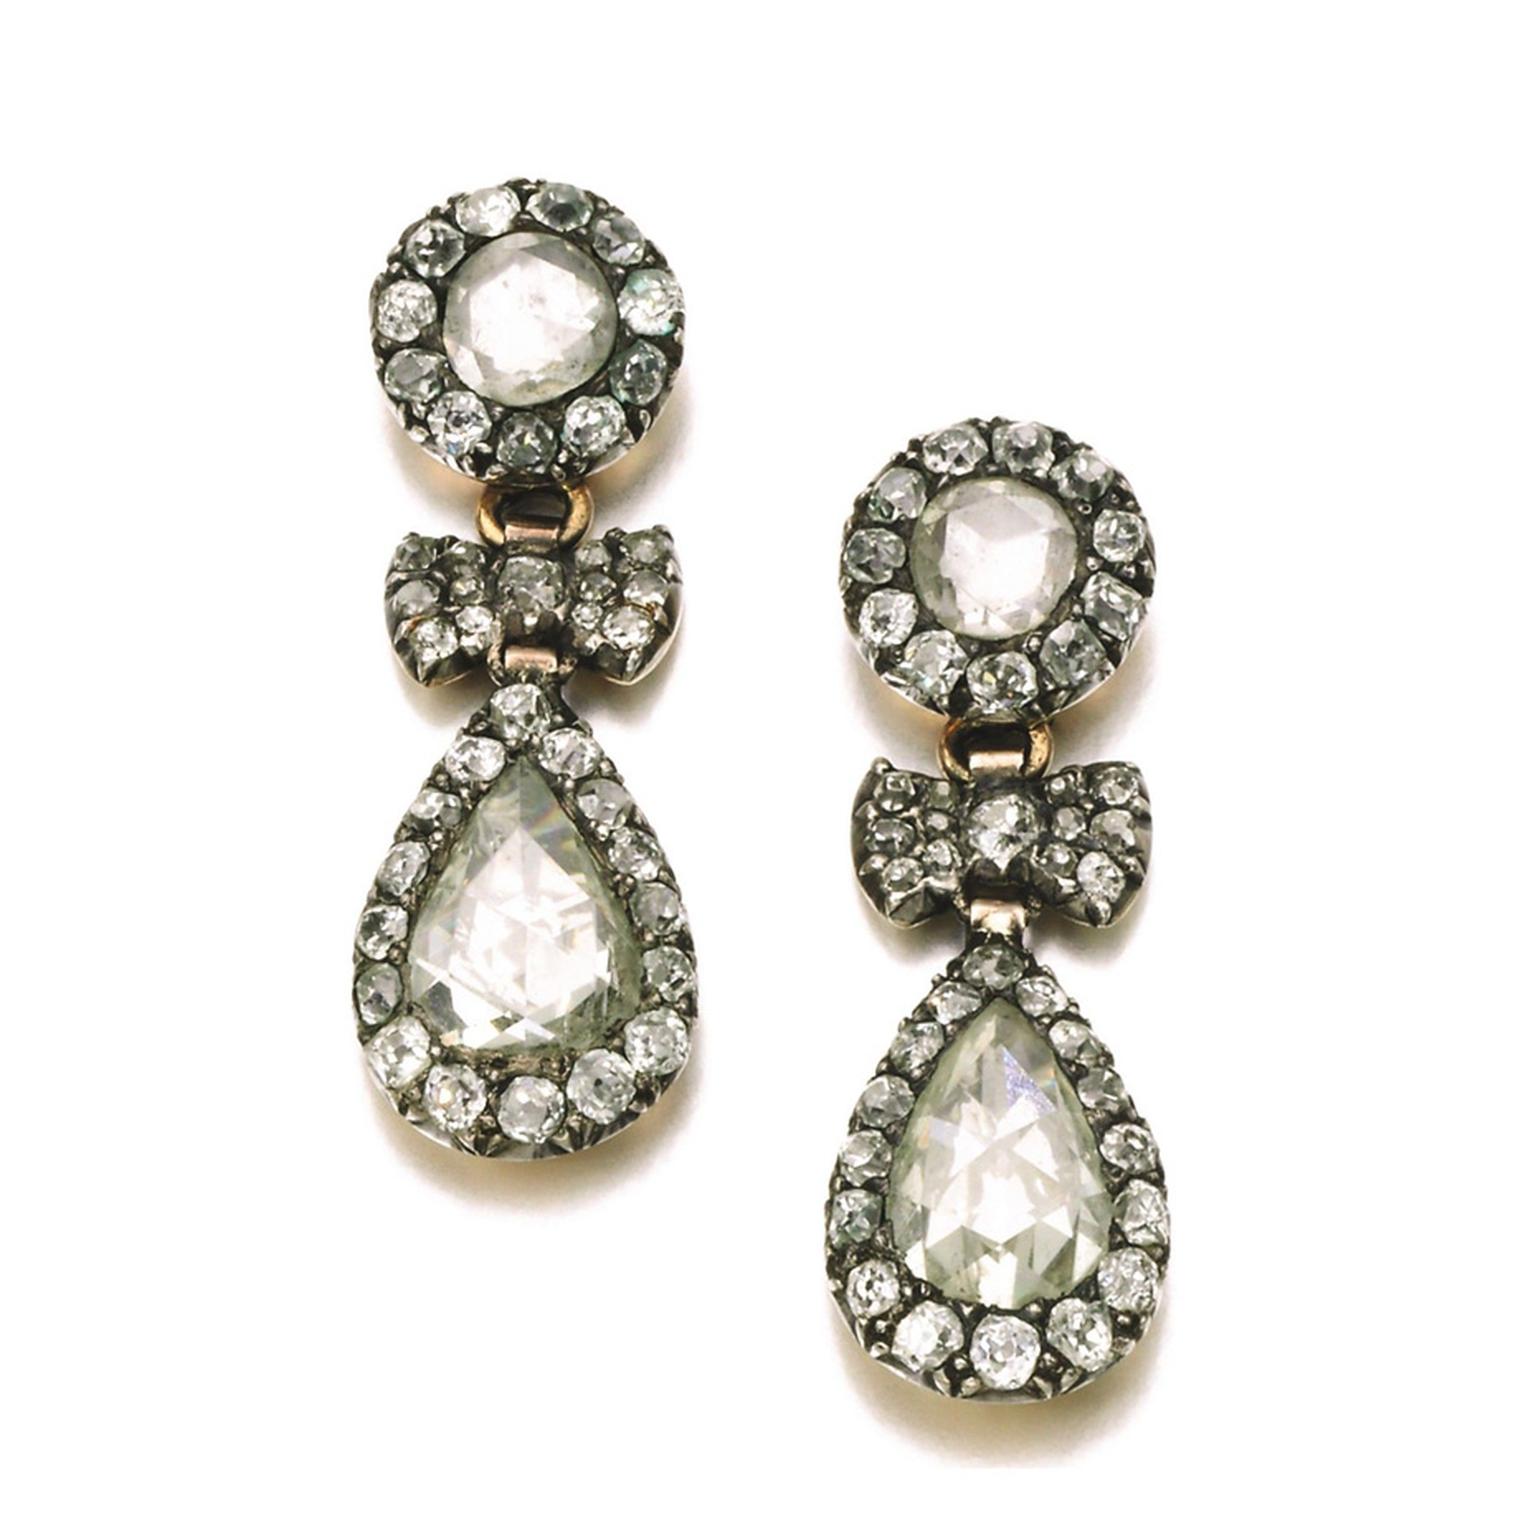 These late 18th century diamond pendant earrings sold for £41,250 at Sotheby's London in 2014.